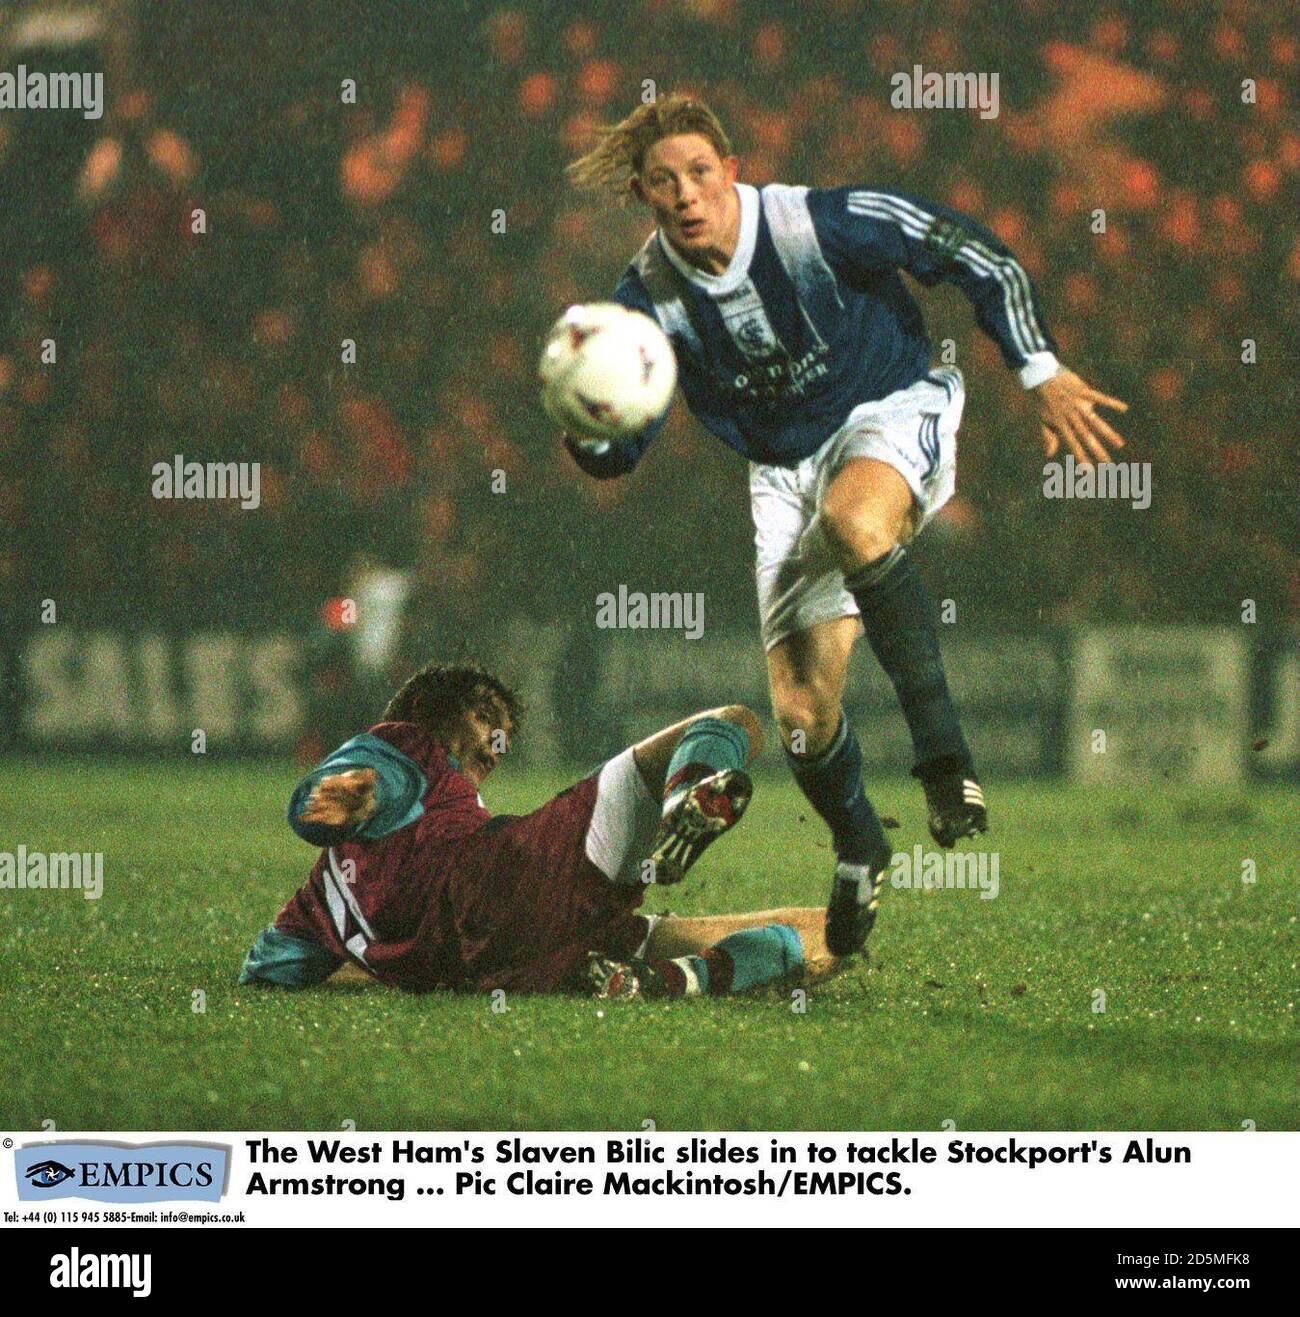 The West Ham's Slaven Bilic slides in to tackle Stockport's Alun Armstrong Stock Photo